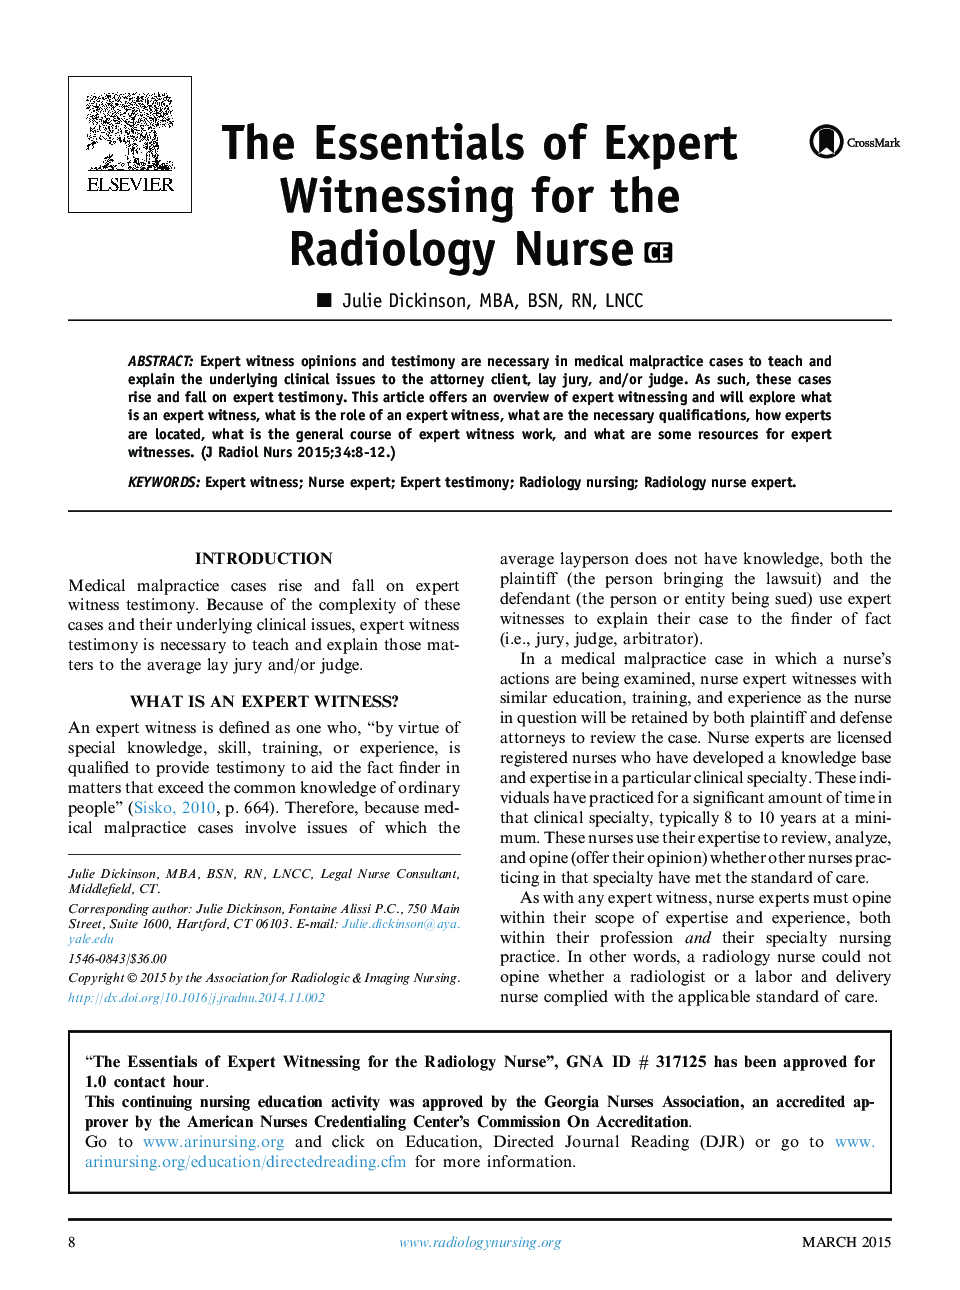 The Essentials of Expert Witnessing for the Radiology Nurse